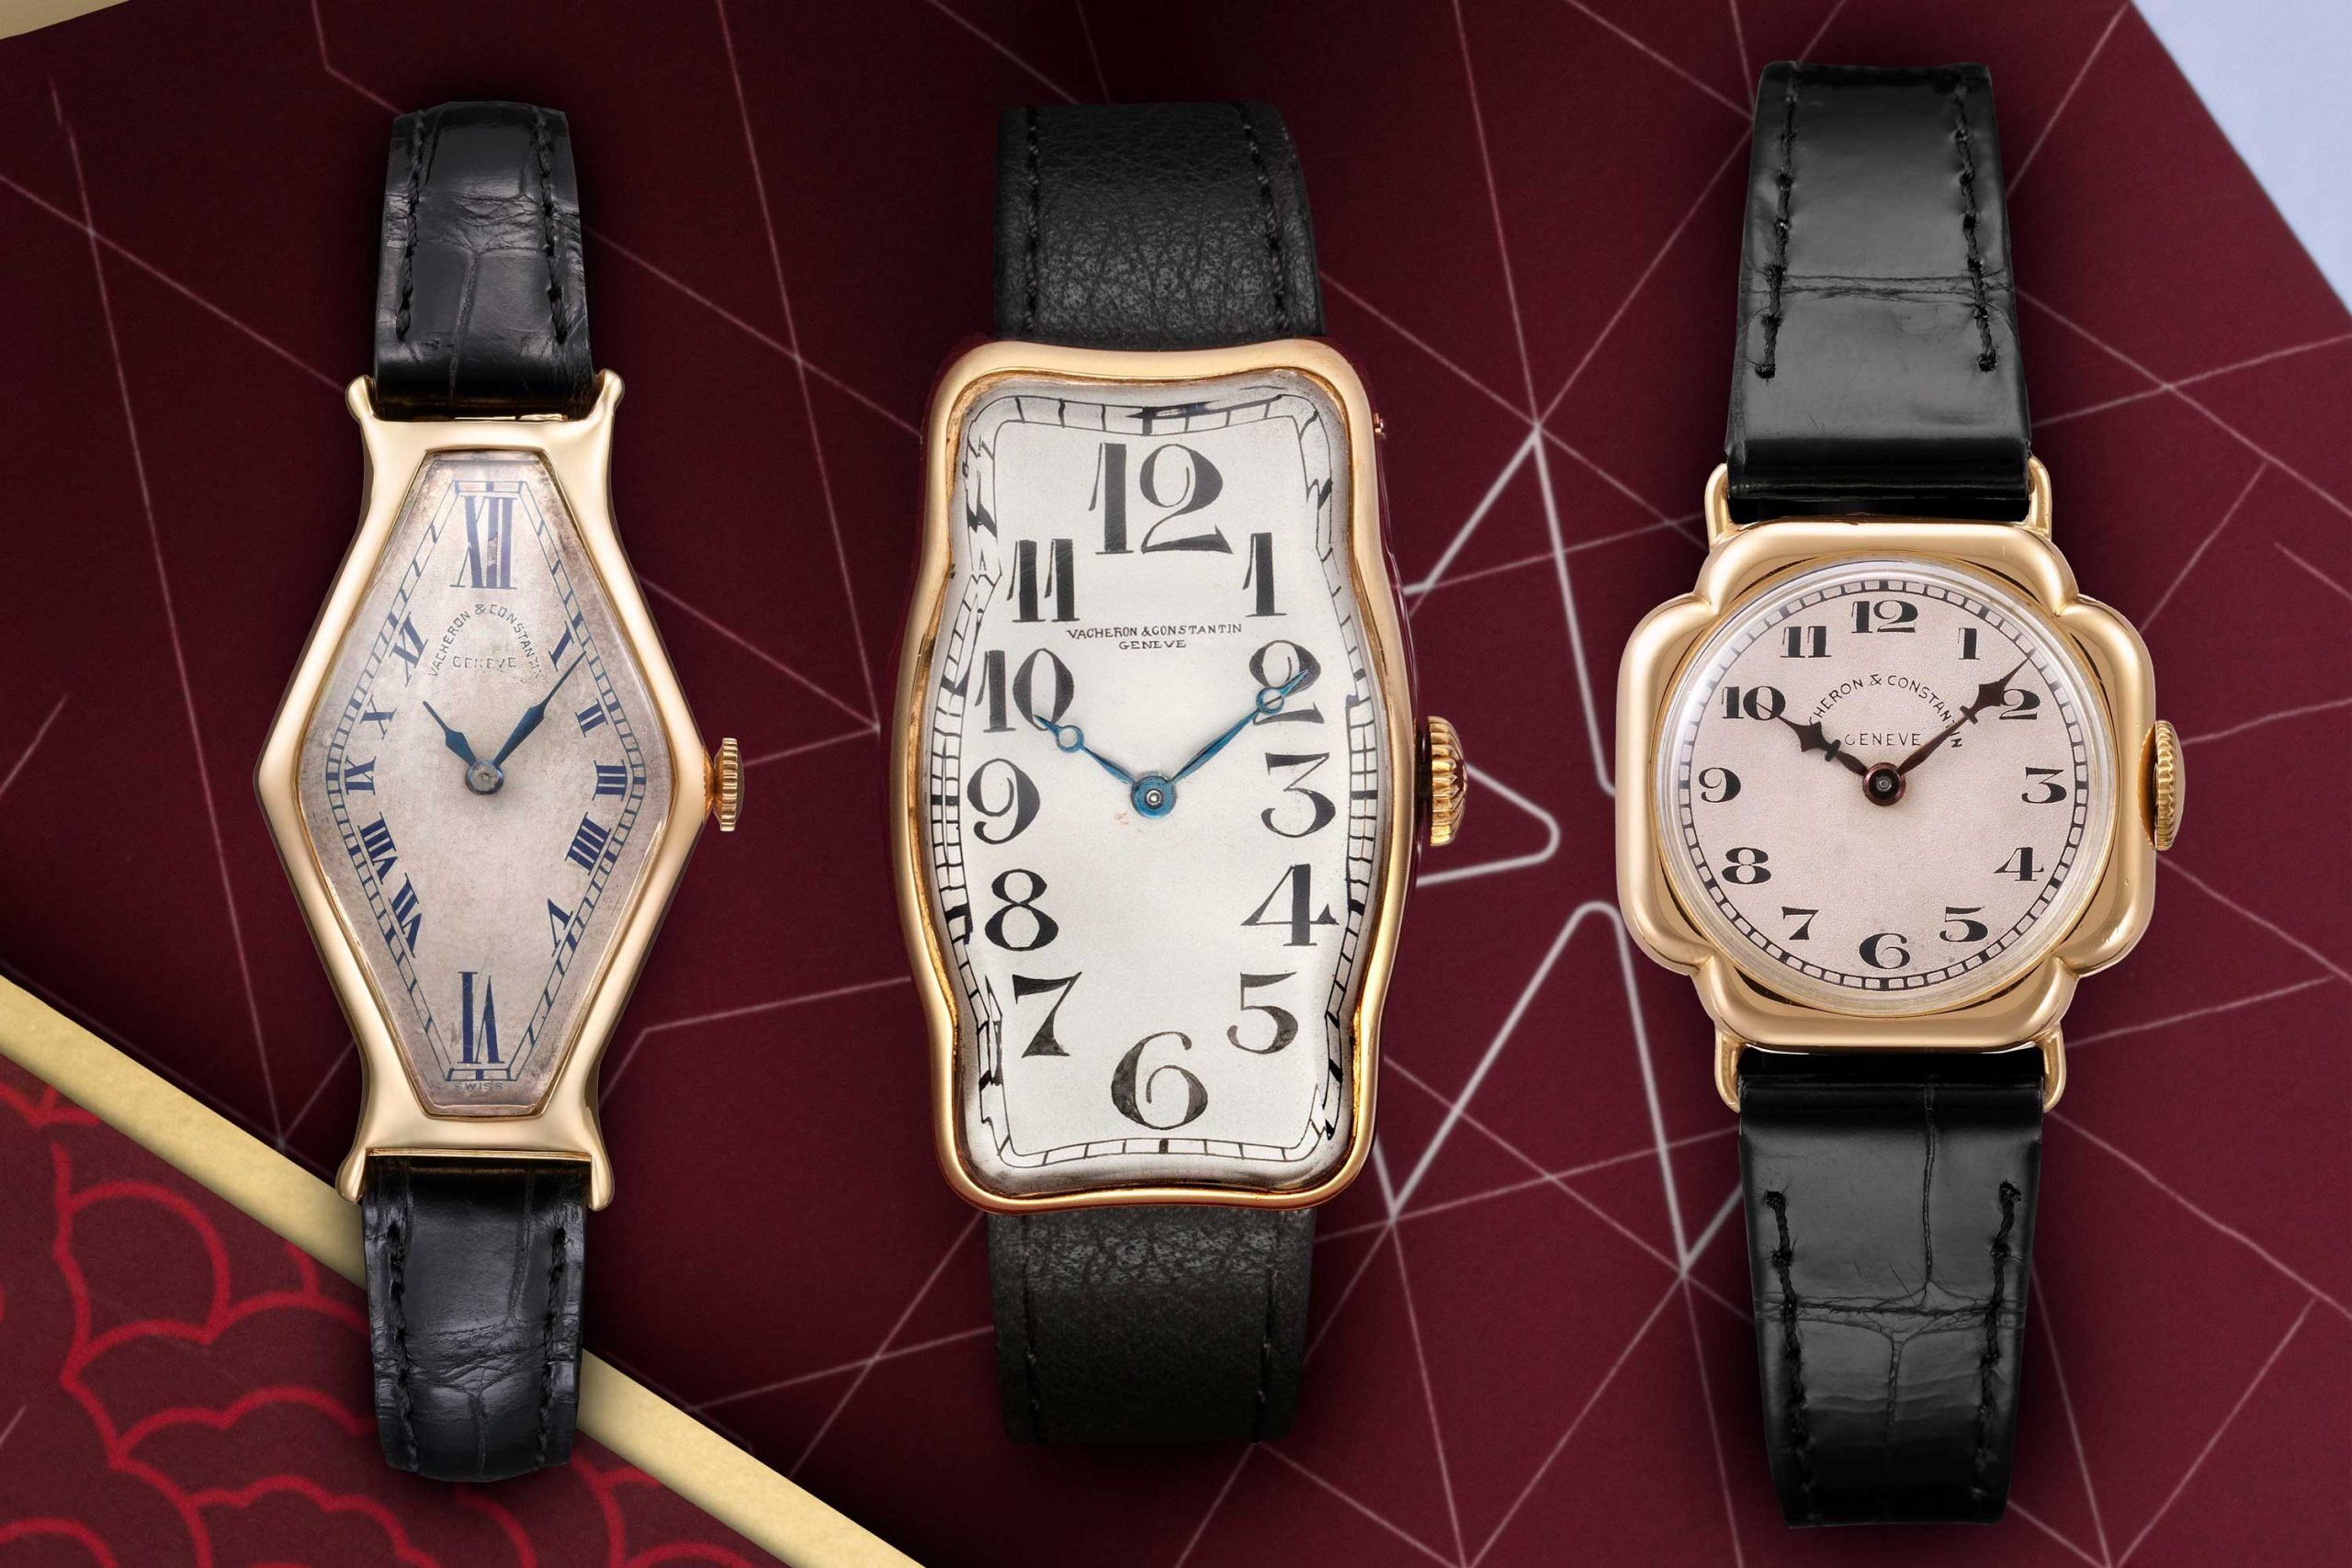 A Retrospective on Shaped Watches